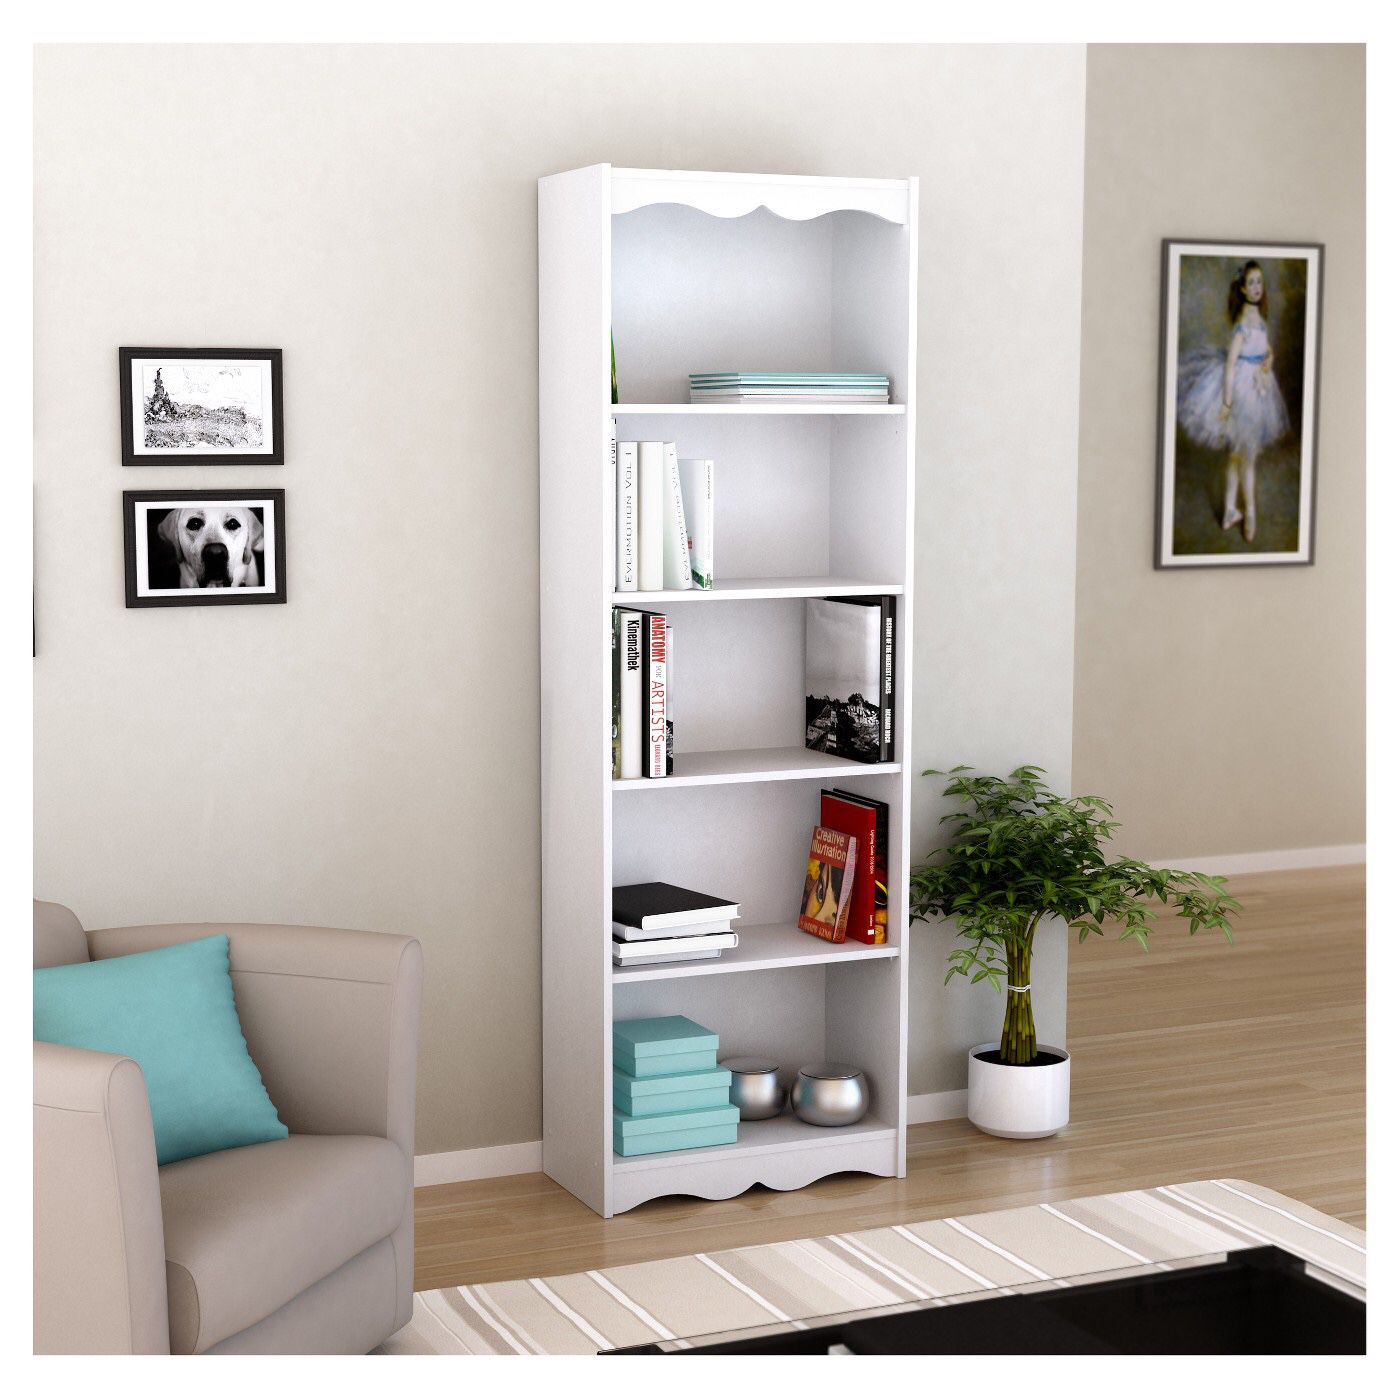 Hawthorn 72" Tall Bookcase - Frost White - Corliving